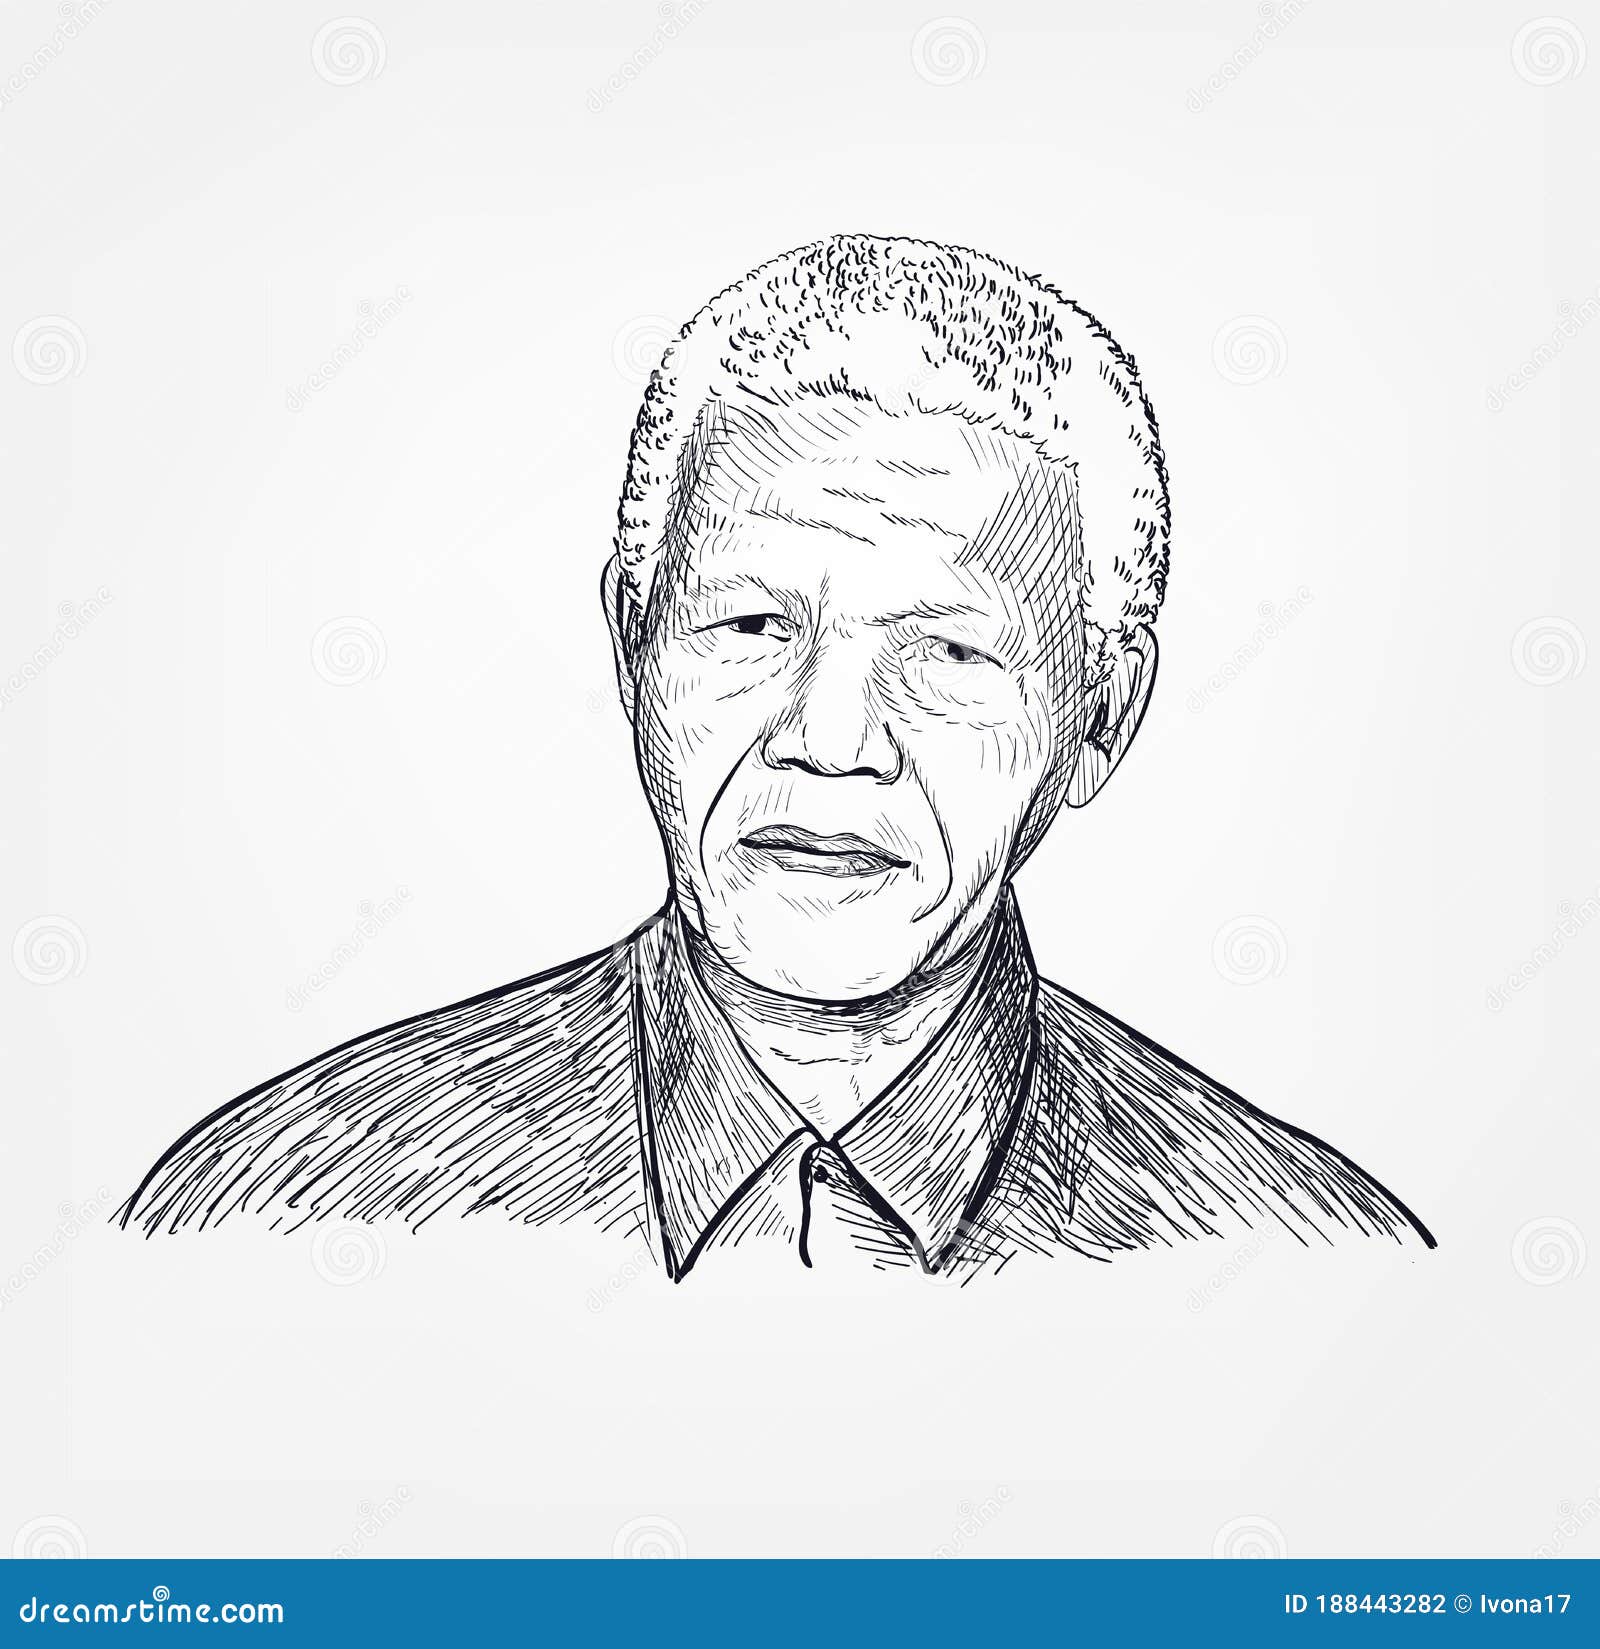 How To Draw Nelson Mandela. Pencil sketch. ( Step by step) - YouTube